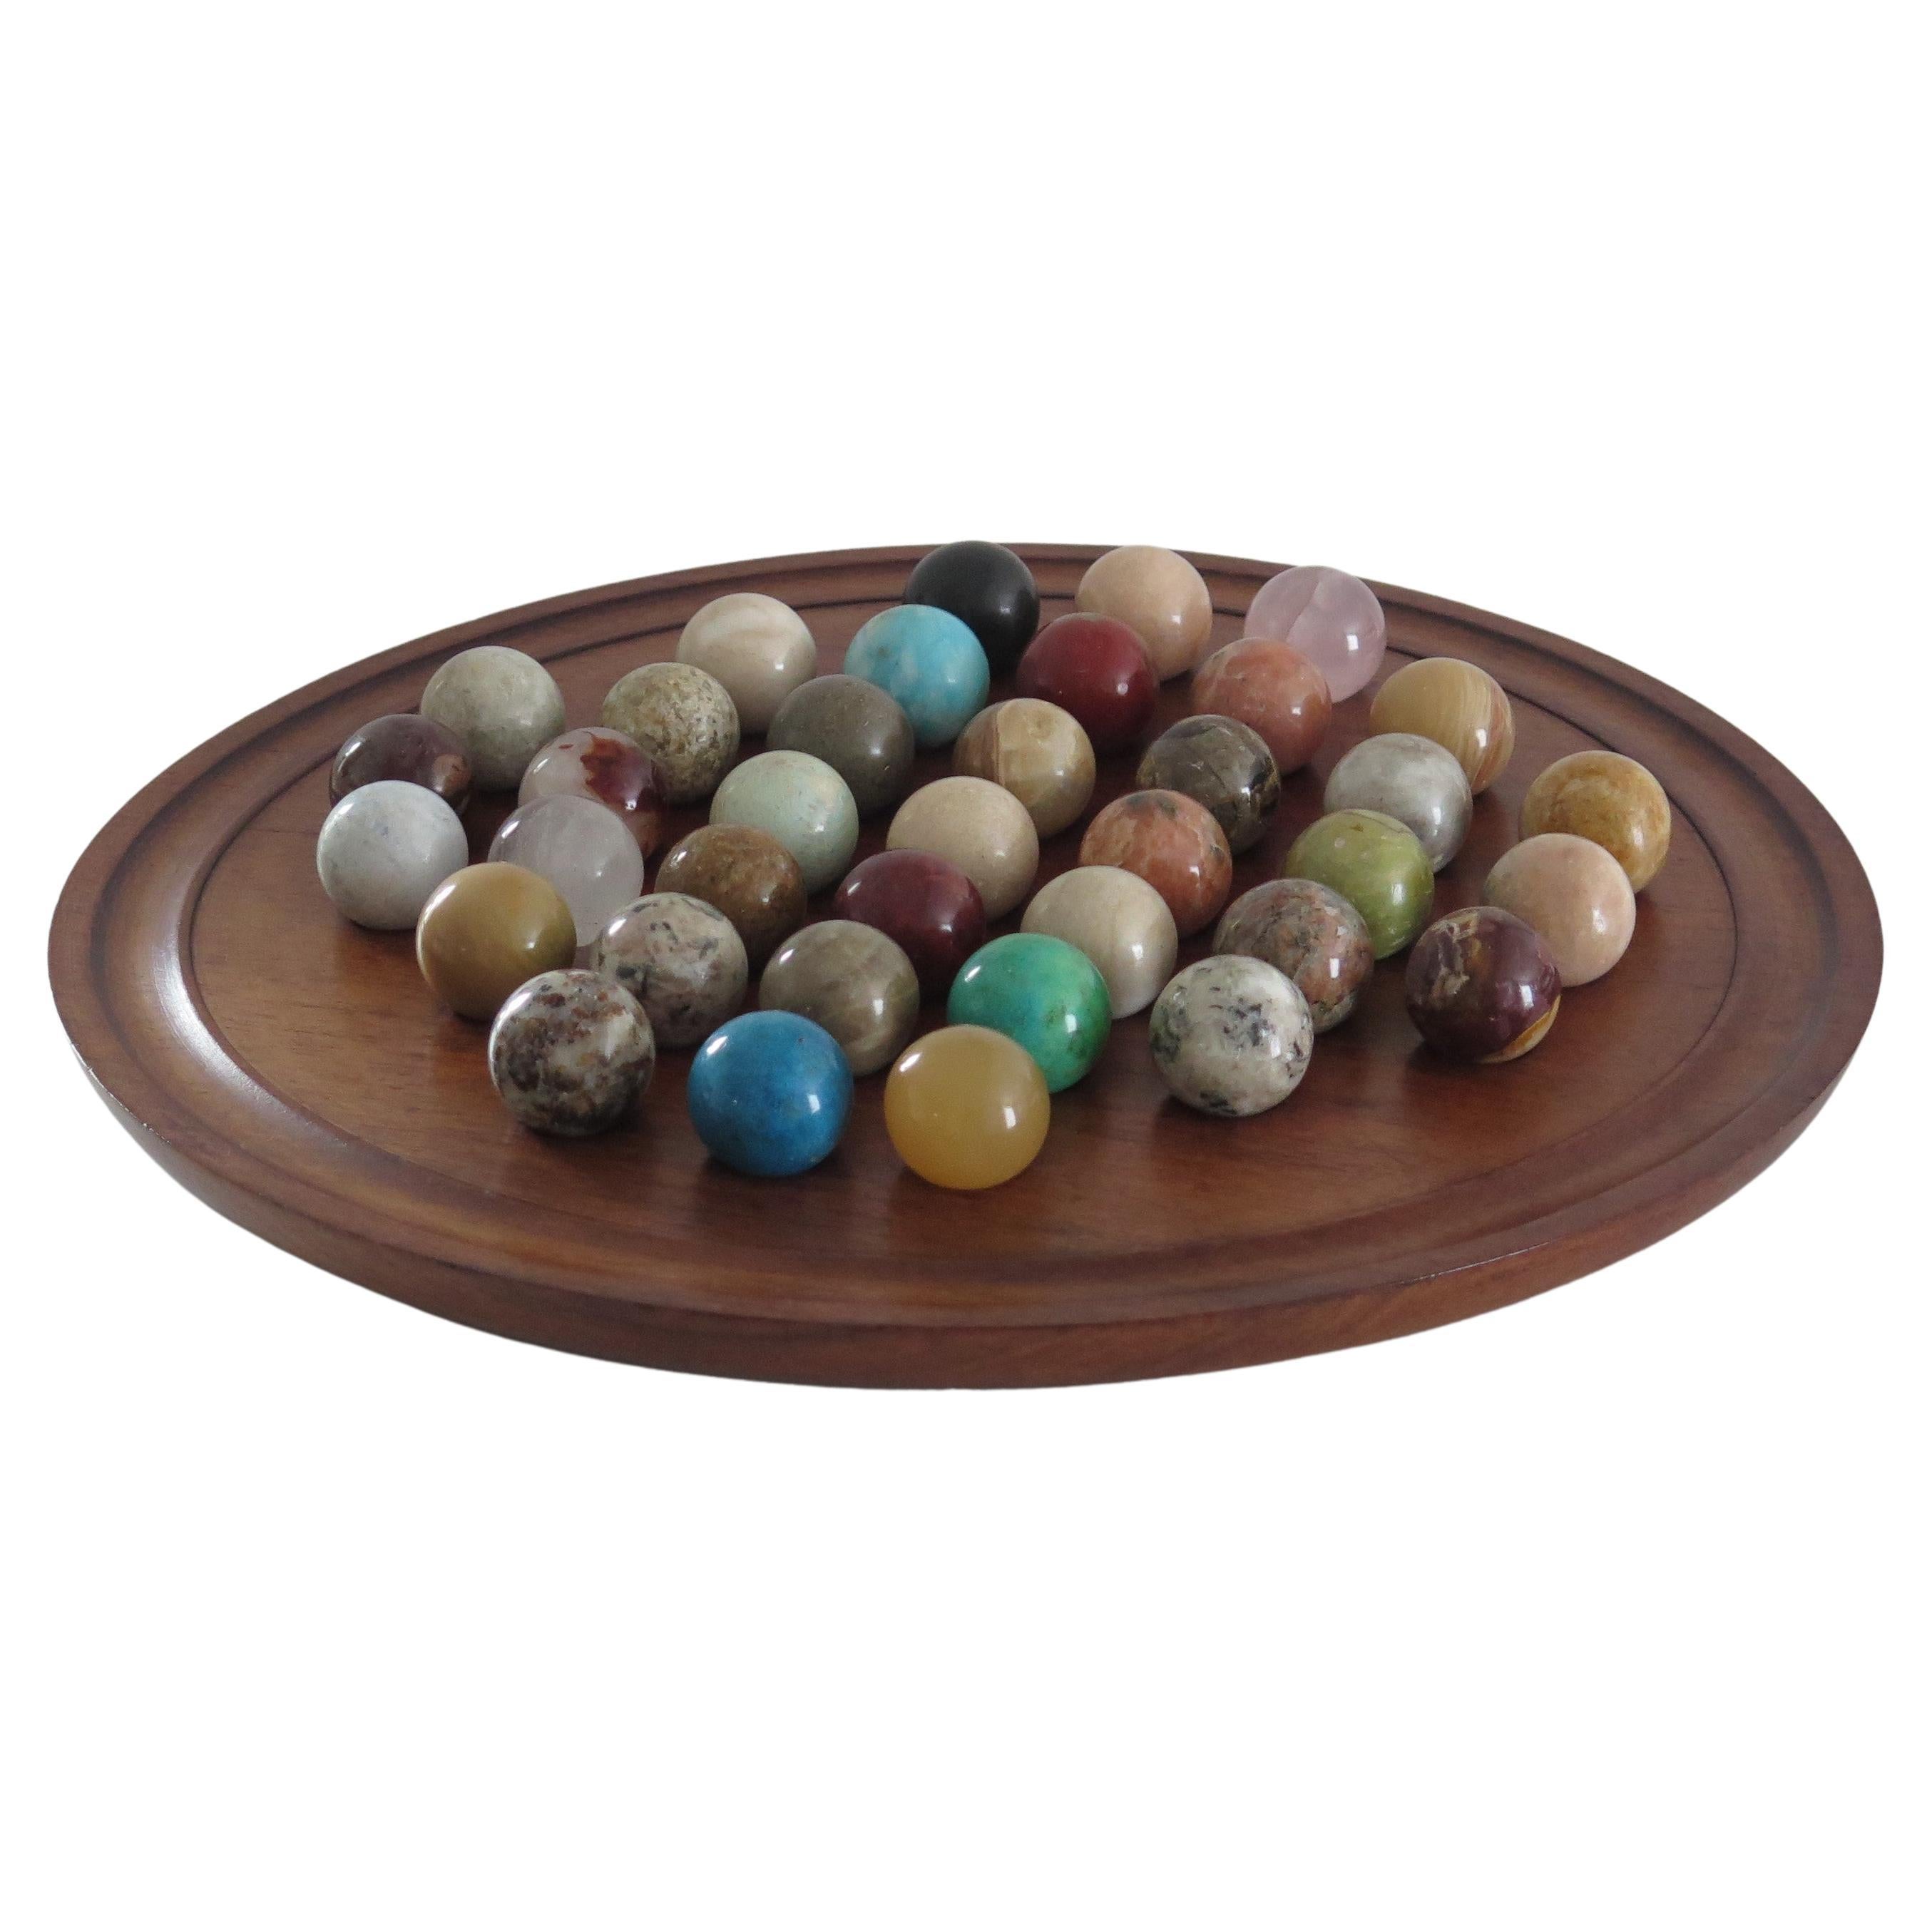 This is a very decorative and complete board game of 37 hole marble solitaire with a very large 14 inch diameter hardwood board and 37 beautiful individual mineral or agate stone marbles, which we date to the early 20th century, probably of French